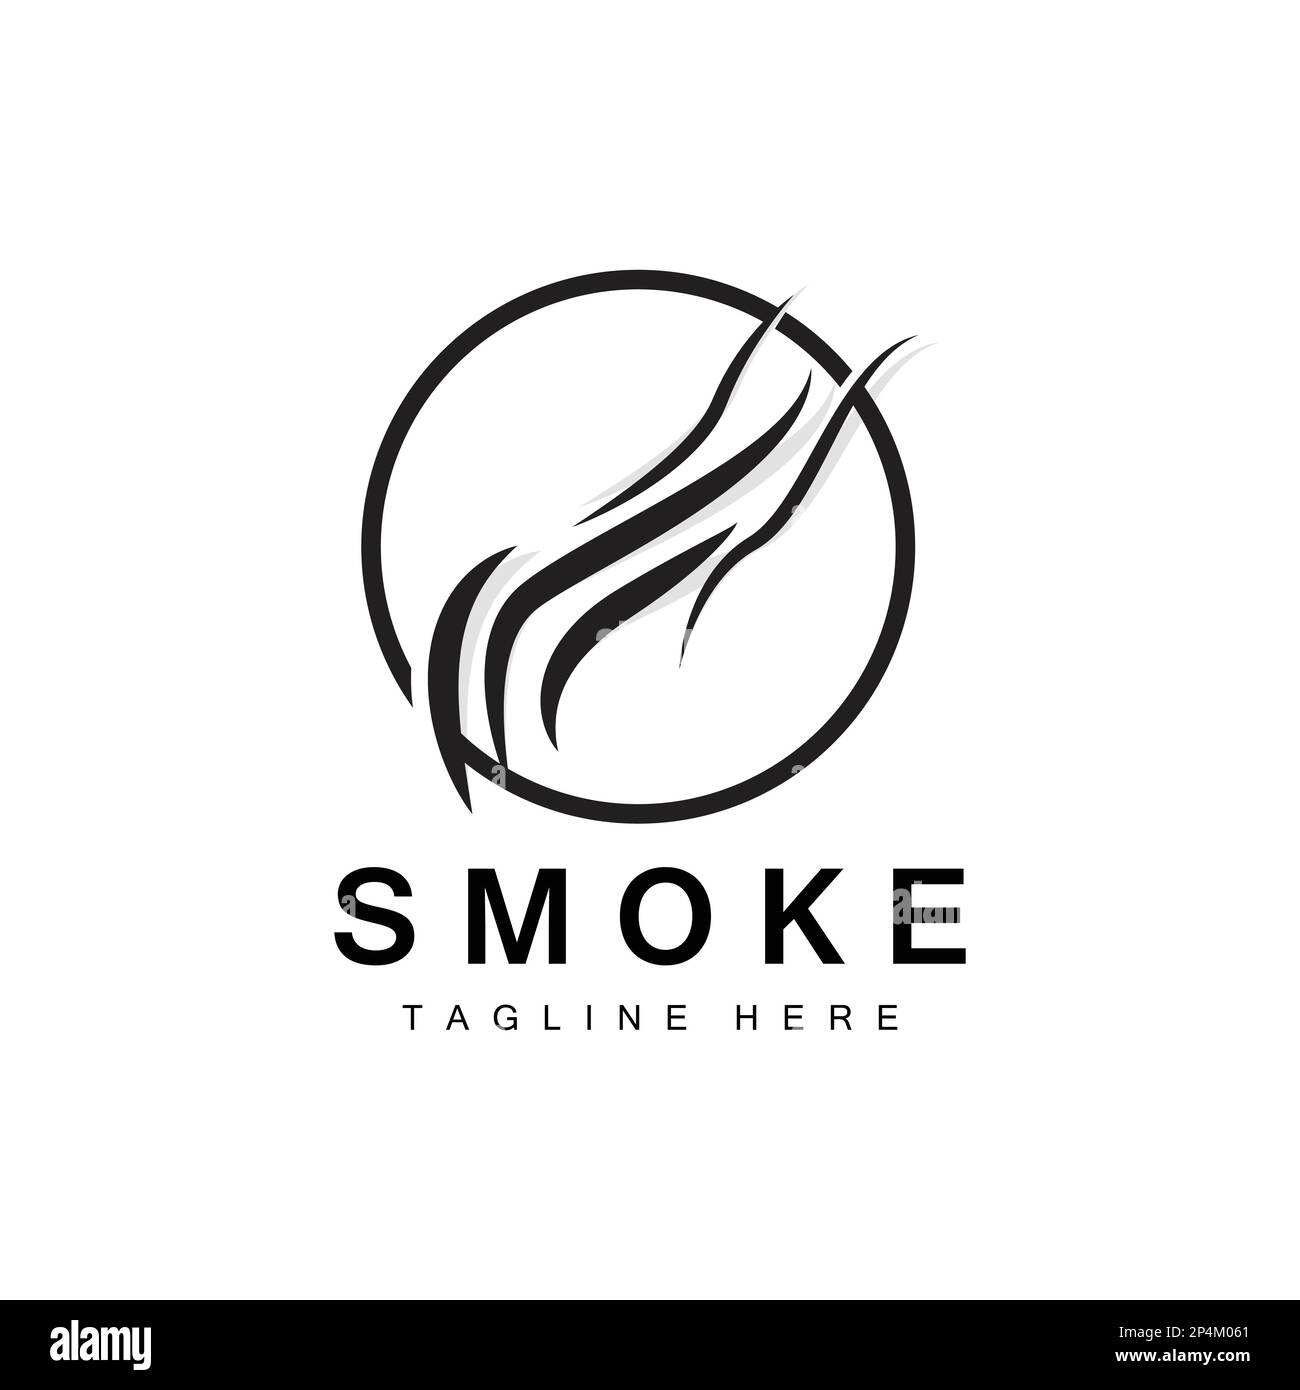 Steam Steam Logo Vector Hot Evaporating Aroma. Smell Line Illustration, Cooking Steam Icon, Steam Train, Baking, Smoking Stock Vector